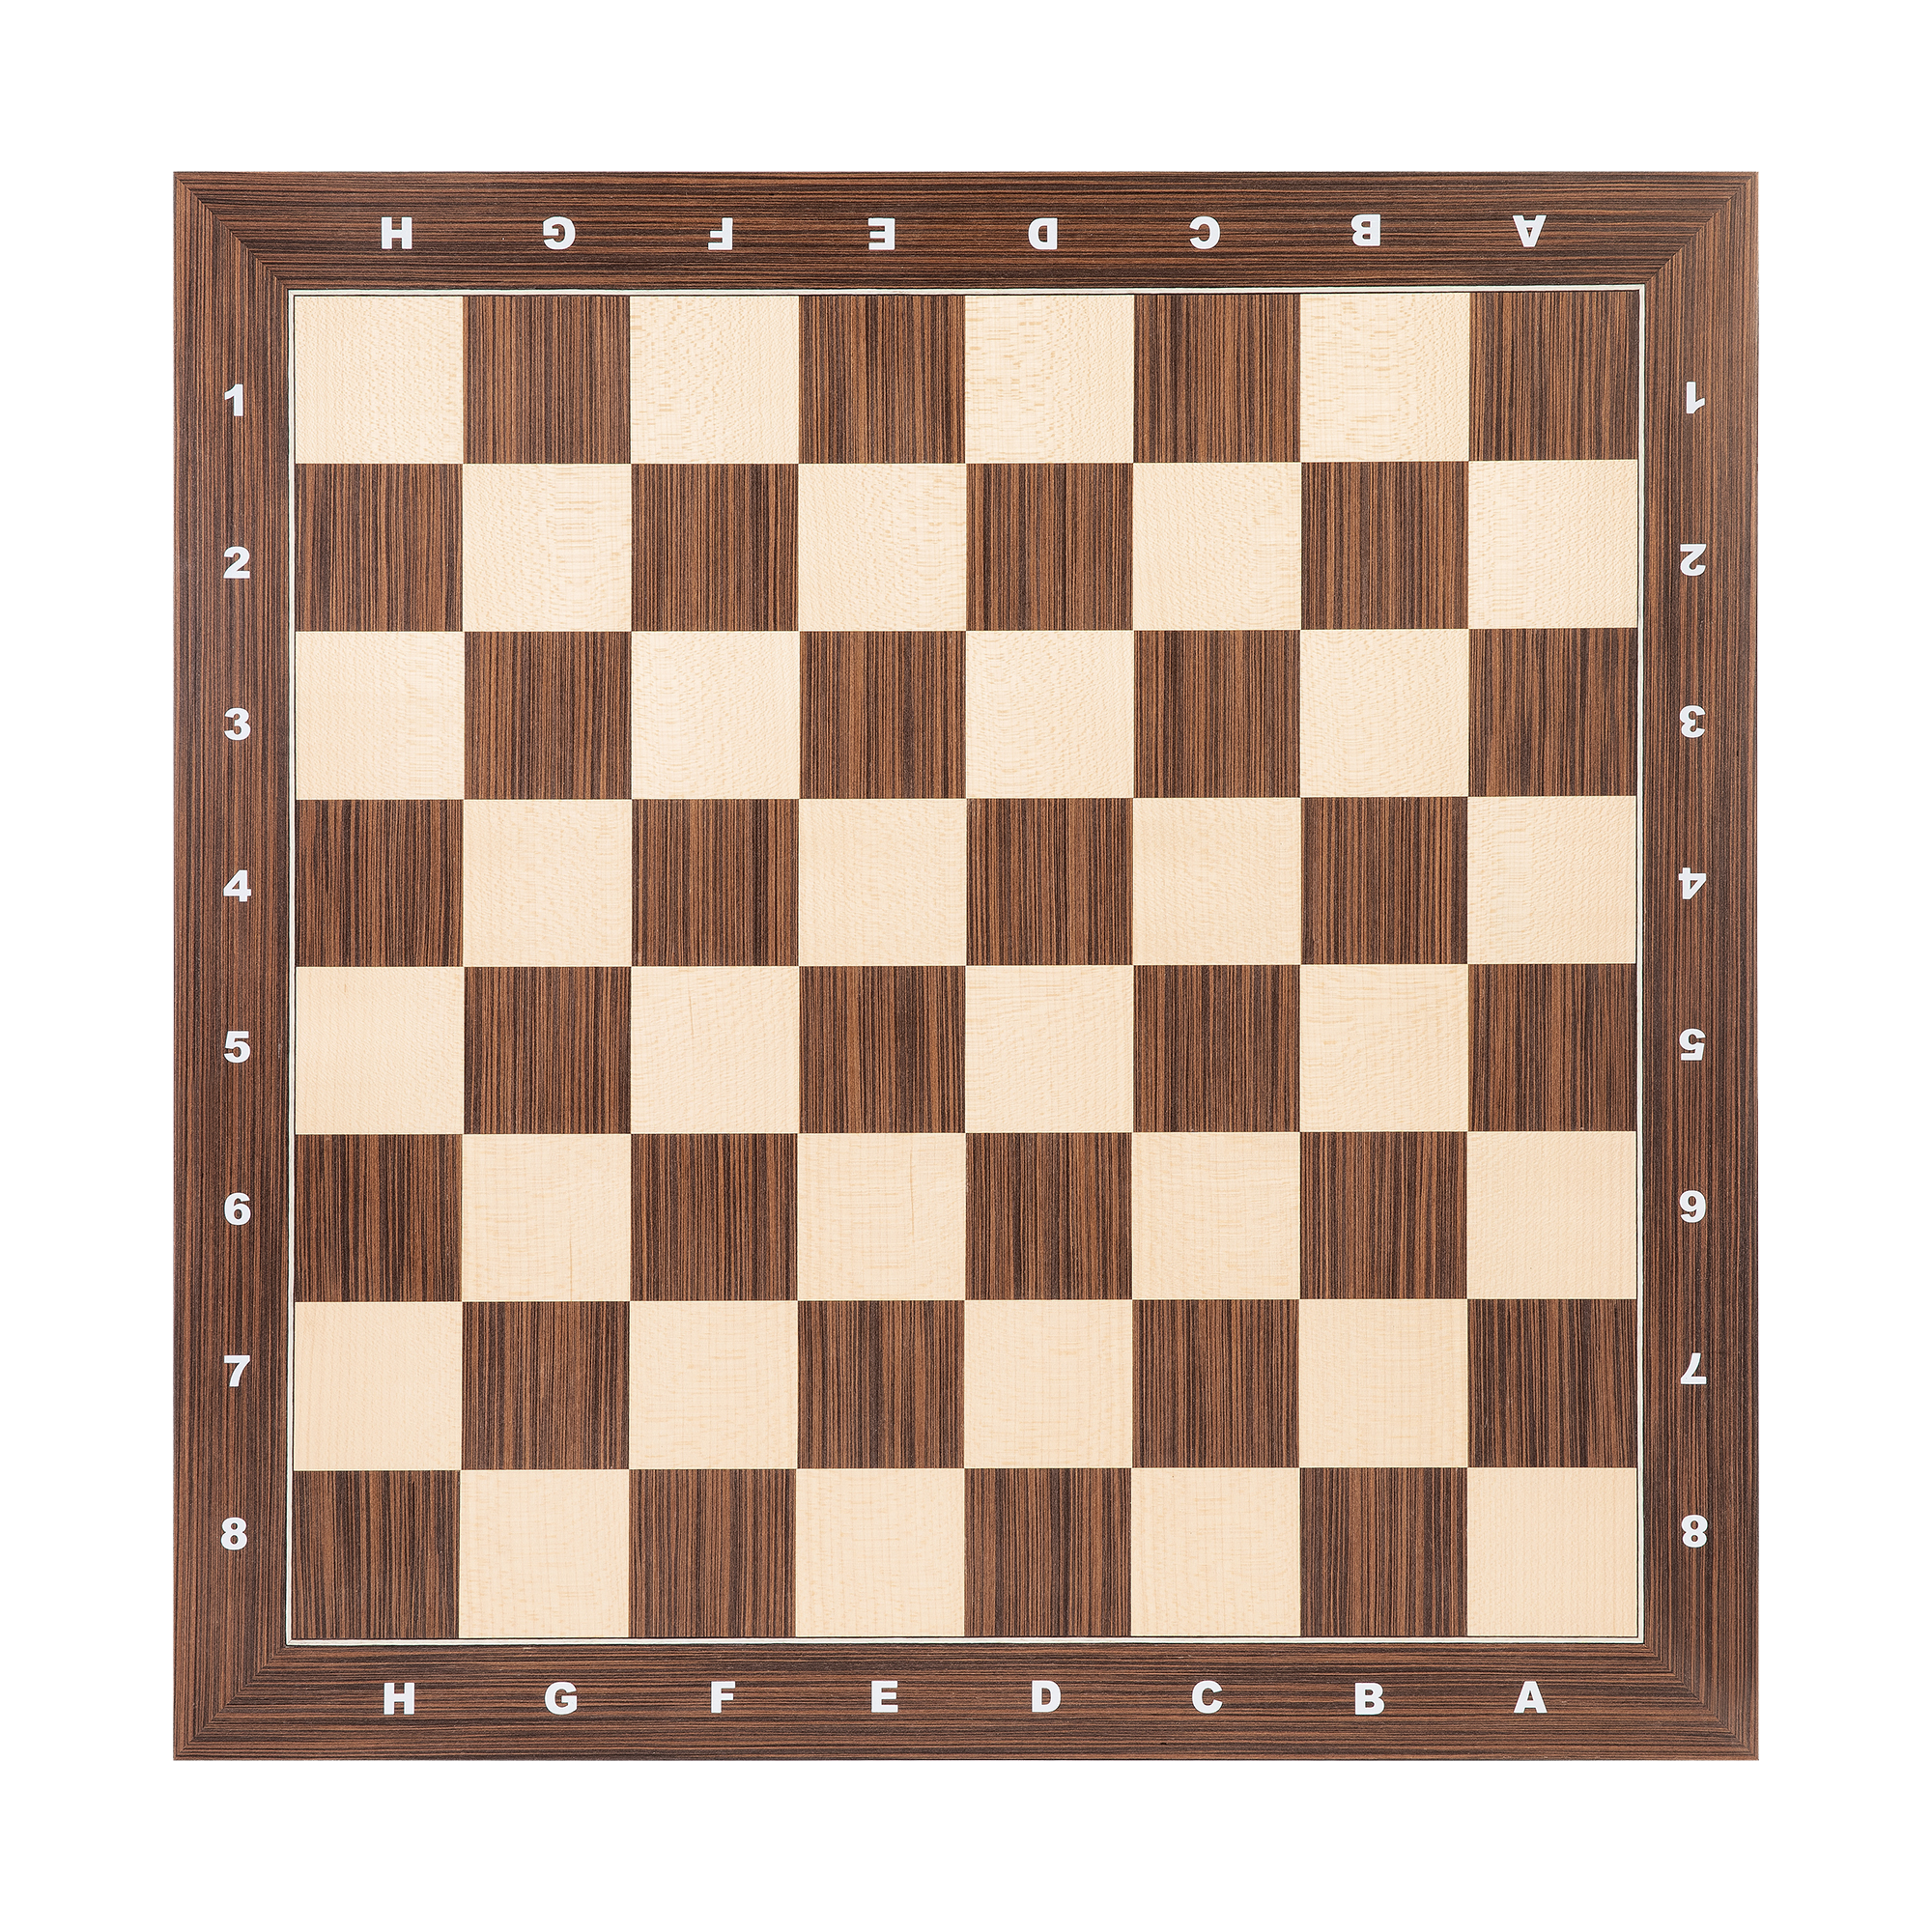 Walnut and Maple Wooden Tournament Chess Board